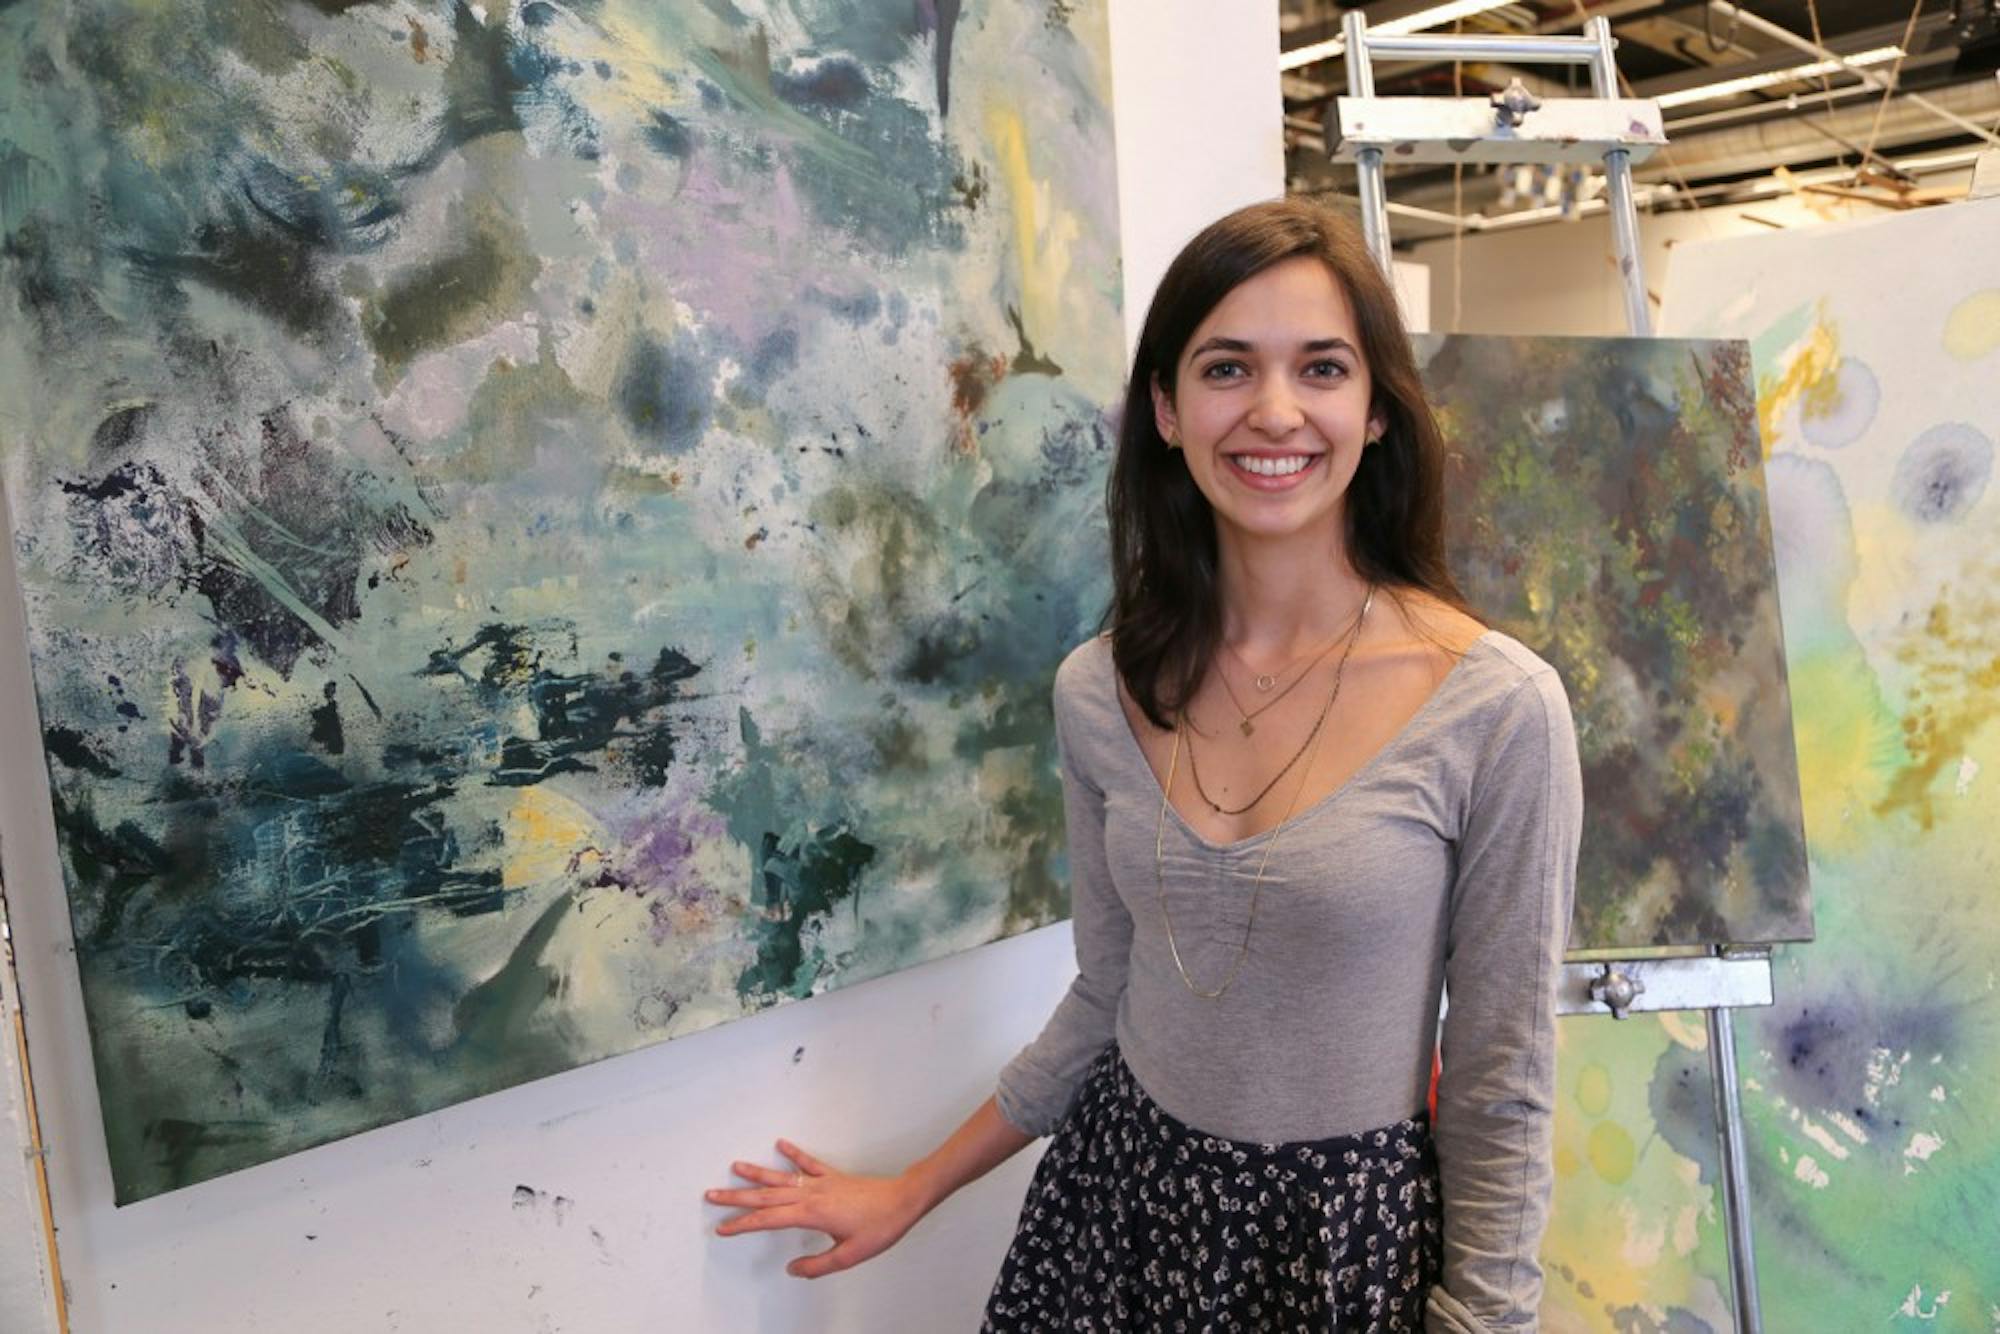 Dorn is working on a senior thesis, which includes a series of large canvasses.